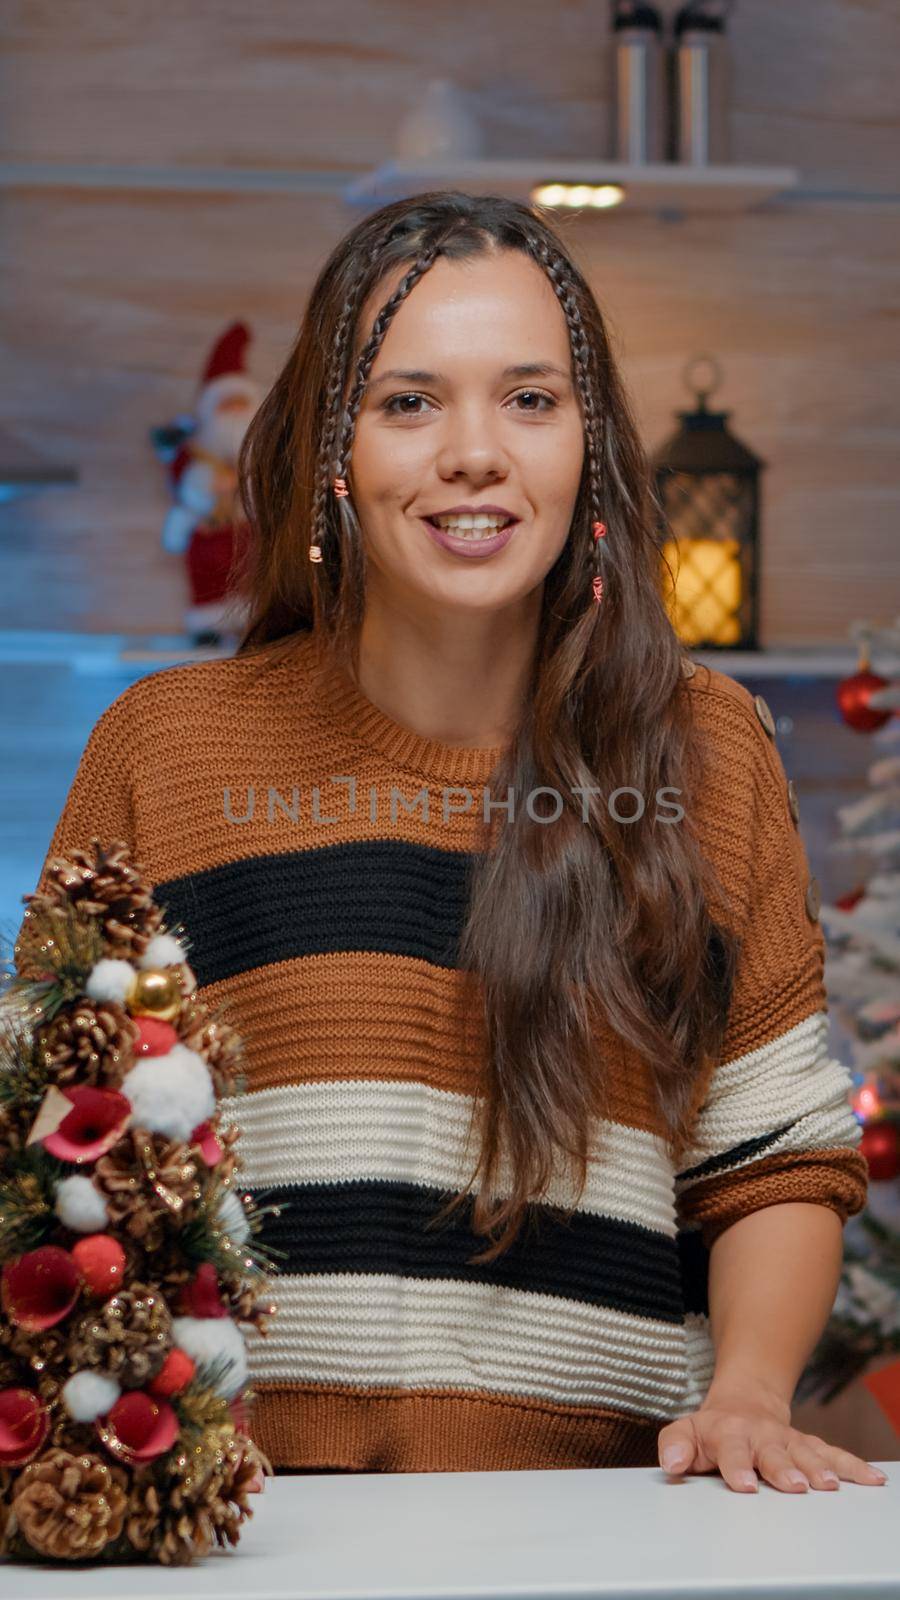 Young adult waving at video call camera in festive kitchen decorated for christmas season. Woman with sweater preparing tea while sitting in room with winter ornaments and decorations